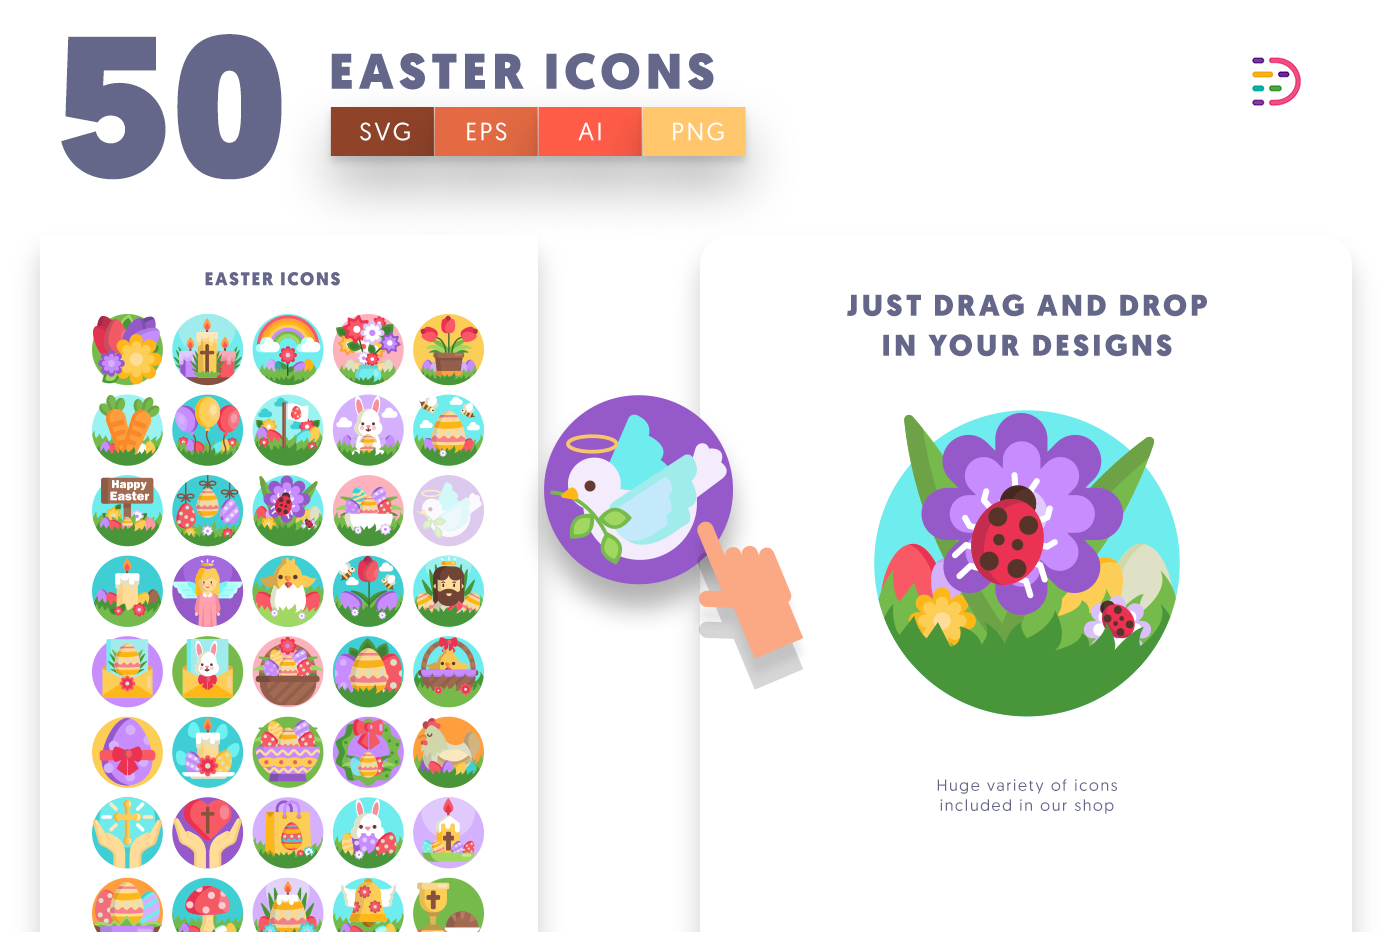 Easter Icons with colored backgrounds